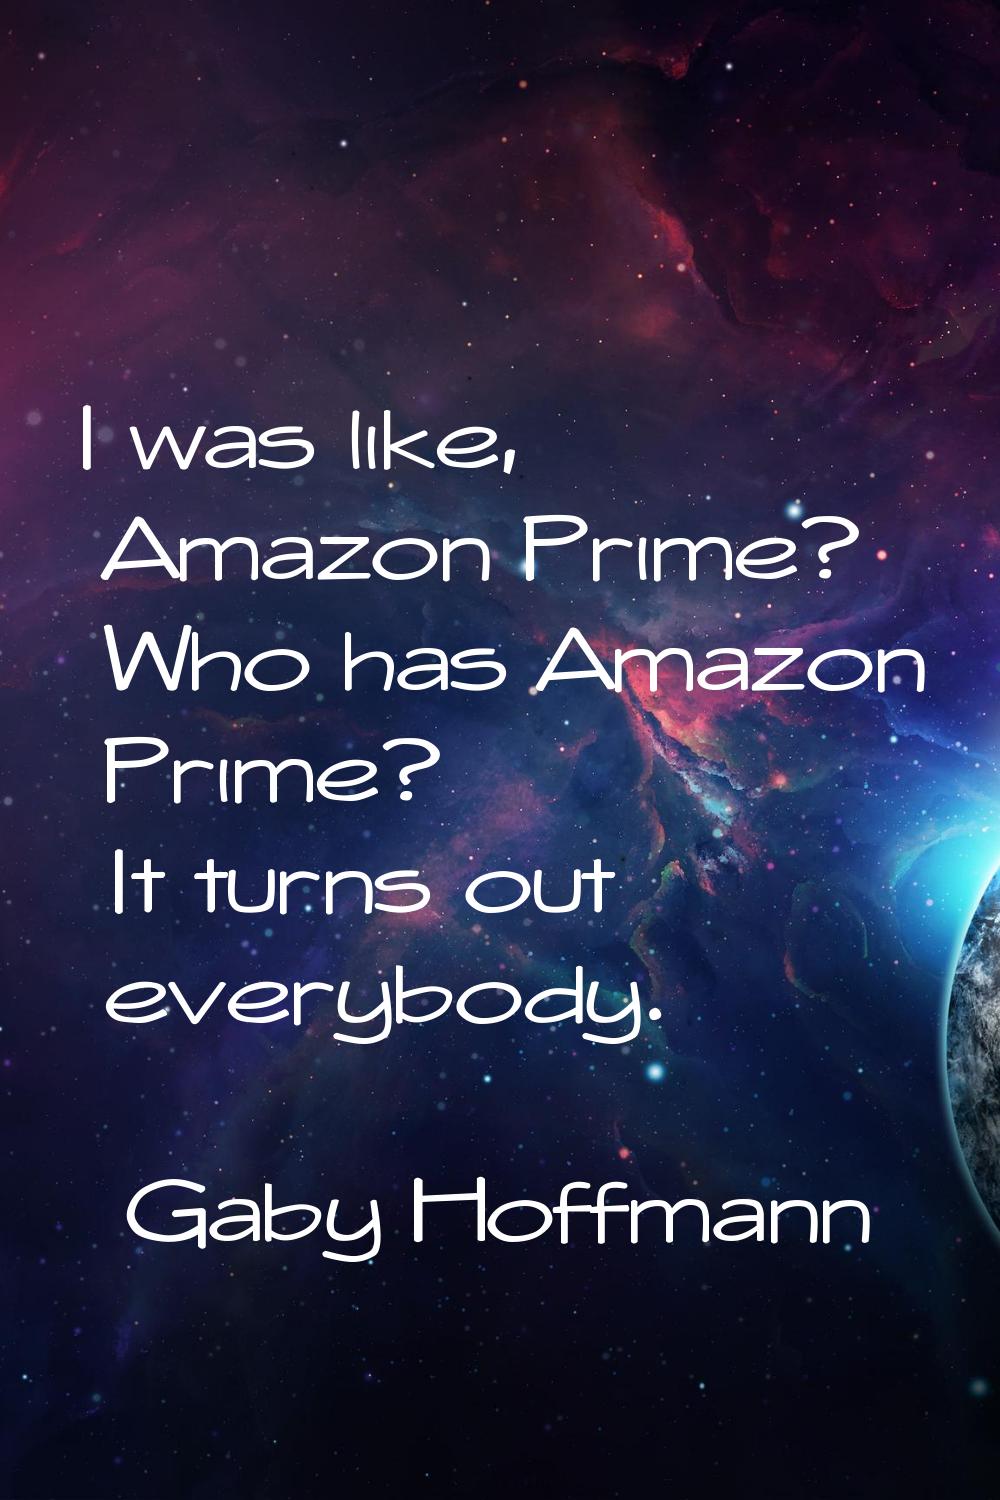 I was like, Amazon Prime? Who has Amazon Prime? It turns out everybody.